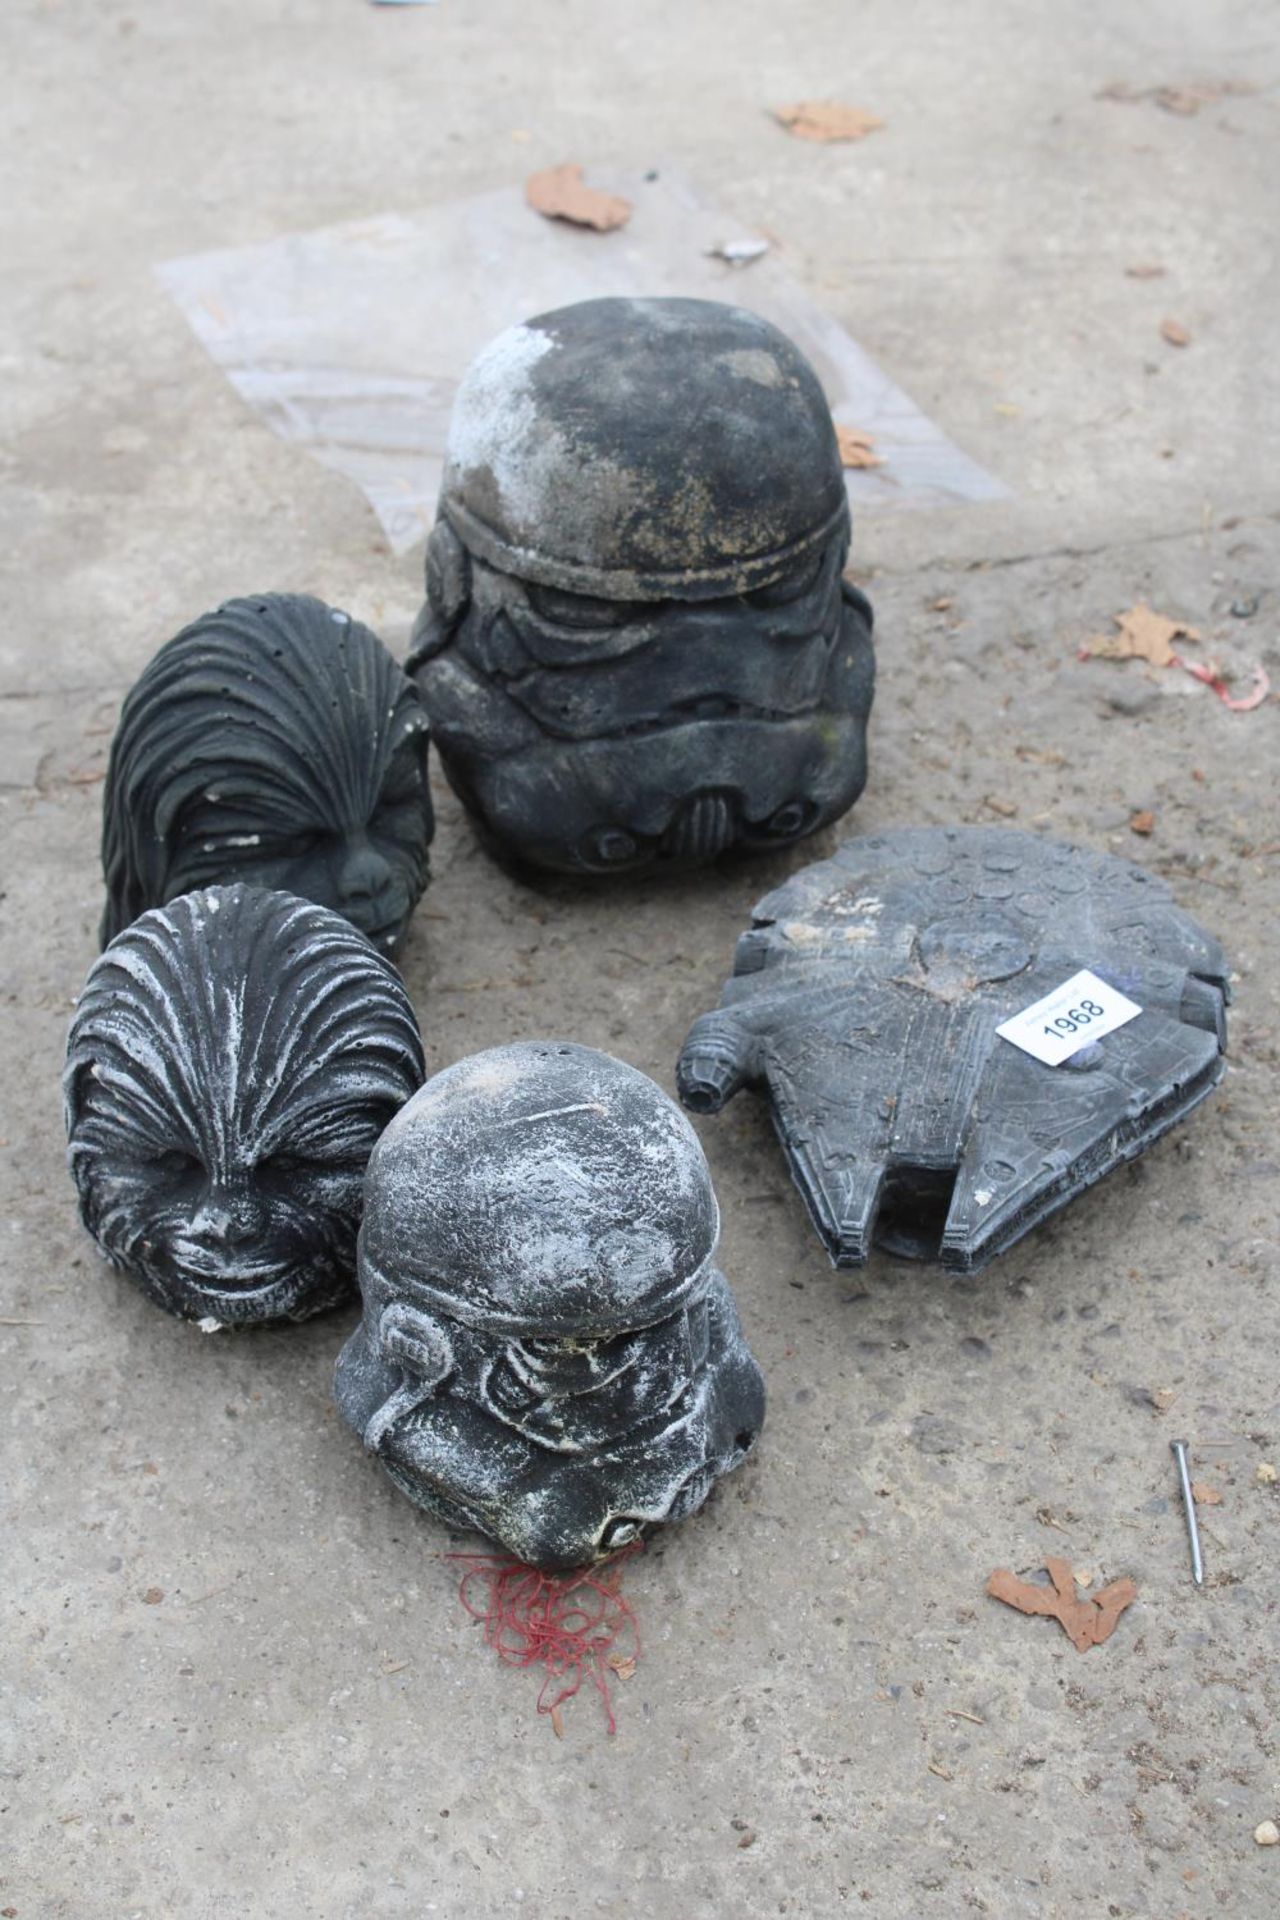 FIVE CONCRETE GARDEN FIGURES TO INCLUDE DARTH VADER AND A STARSHIP ENTERPRISE ETC